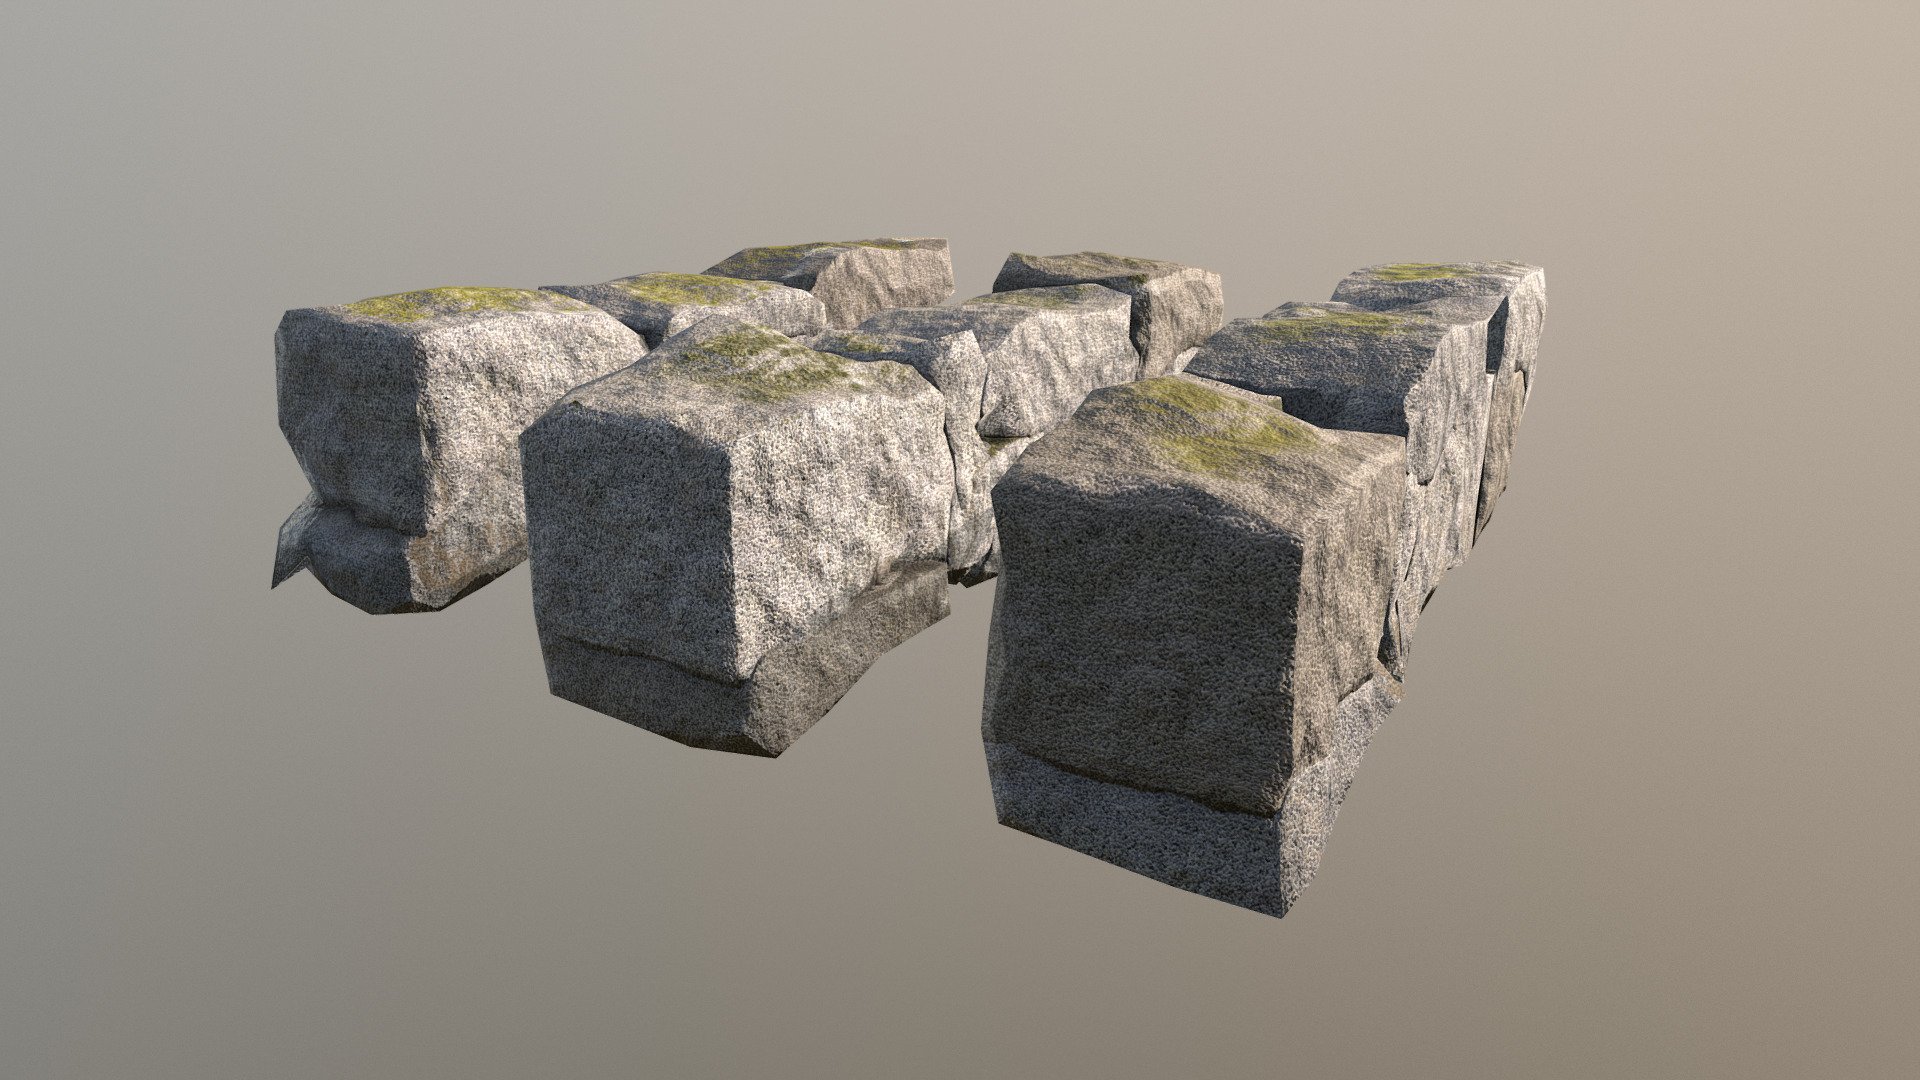 Rockwalls i made for an envoirements im working on, i treid to make them as low poly as i could, The materials are PBR 3d model